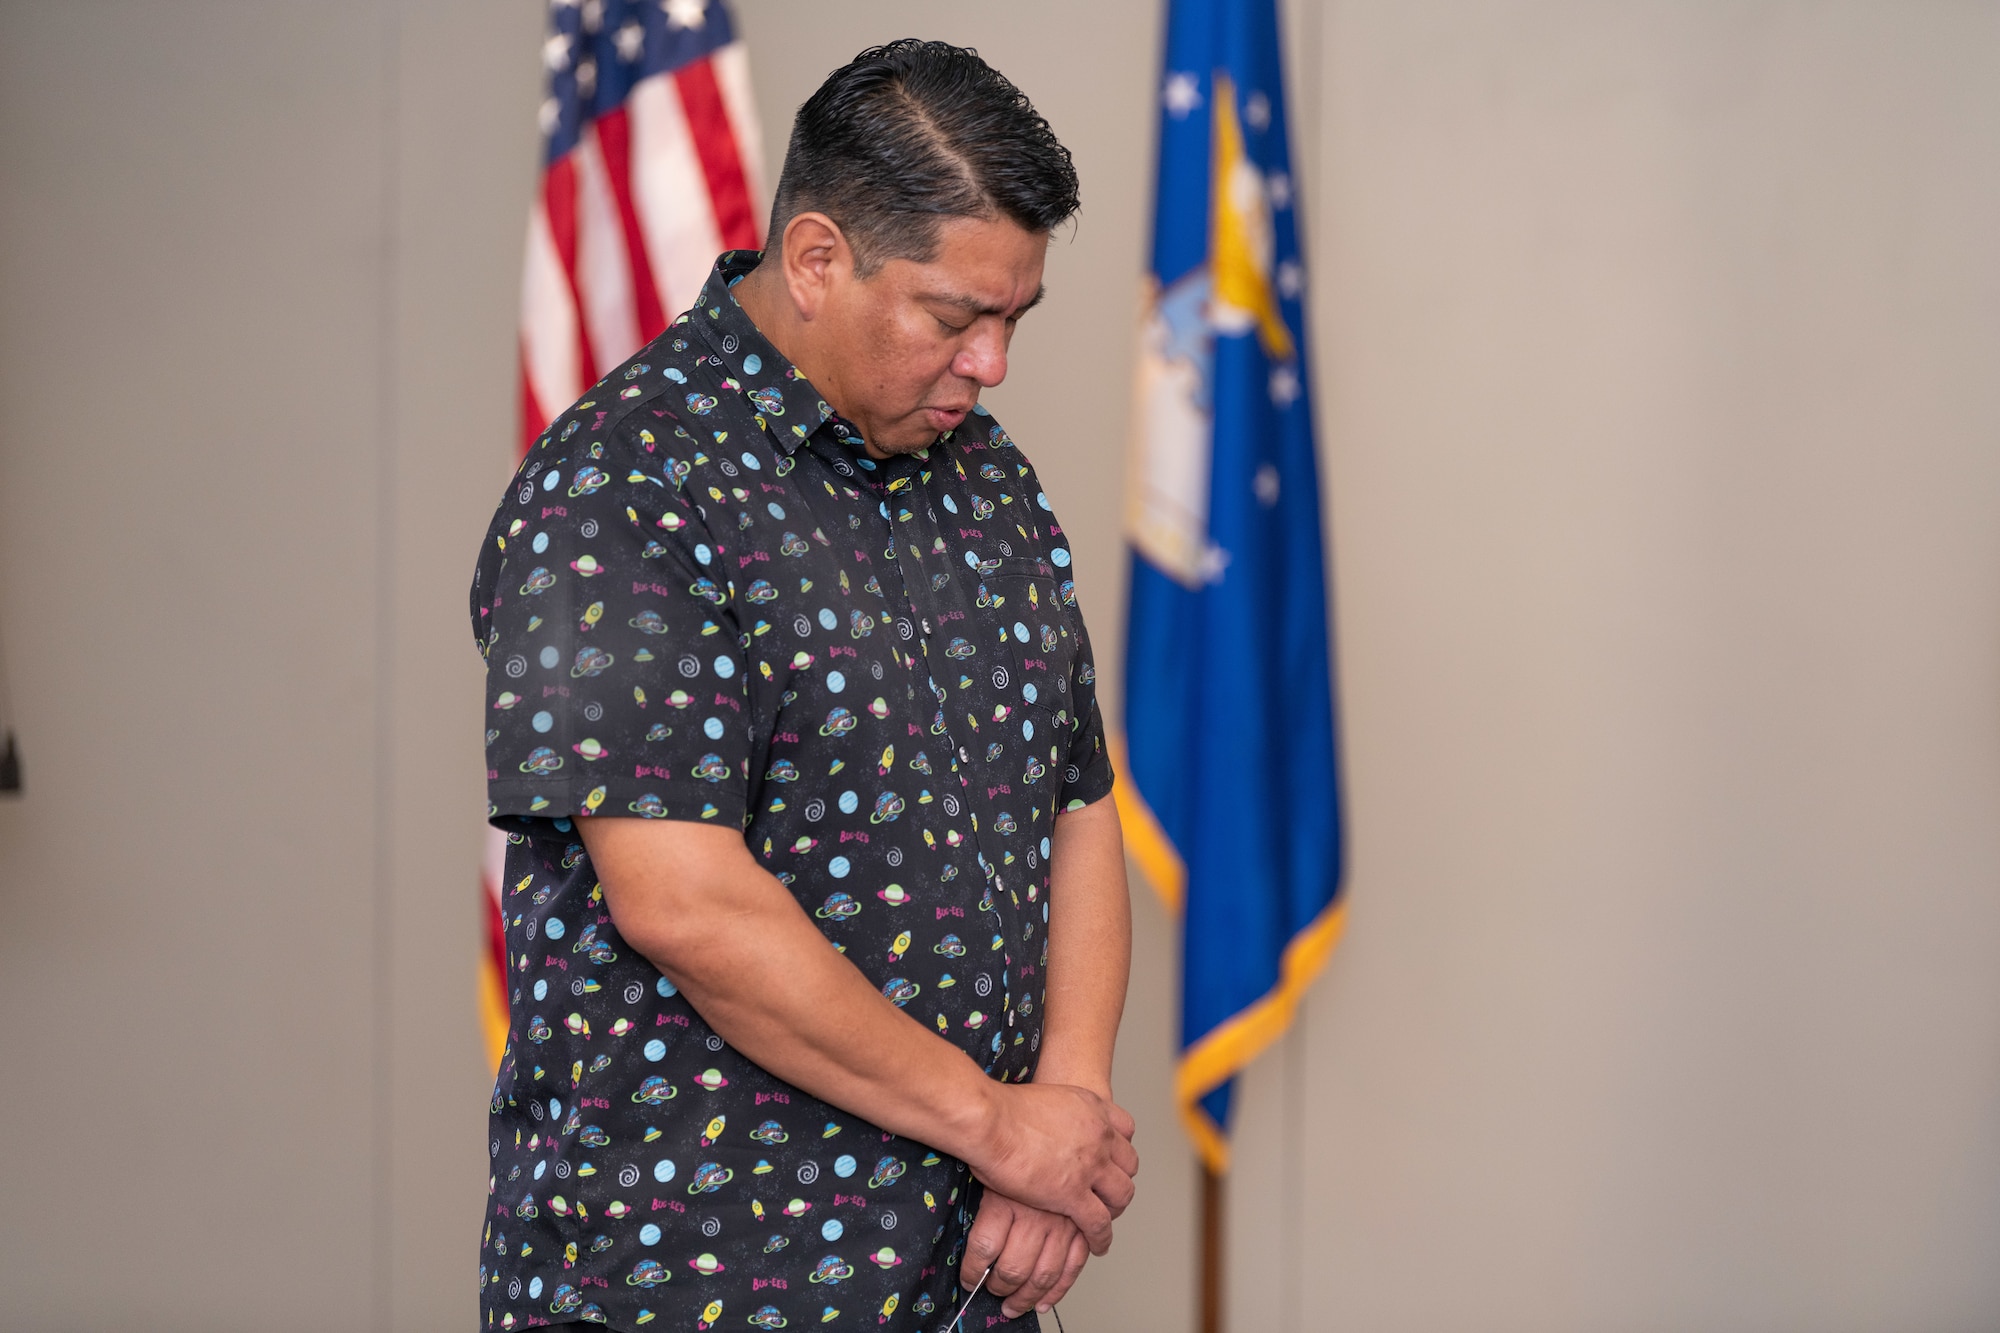 Delvin Johnson, Alabama-Coushatta Tribe of Texas tribal representative, offers a blessing in his mother’s native language from the Coushatta tribe during 2024 Tribal Consultation, March 6 at the Gossick Leadership Center, at Arnold Air Force Base, Tenn. (U.S. Air Force photo by Keith Thornburgh)